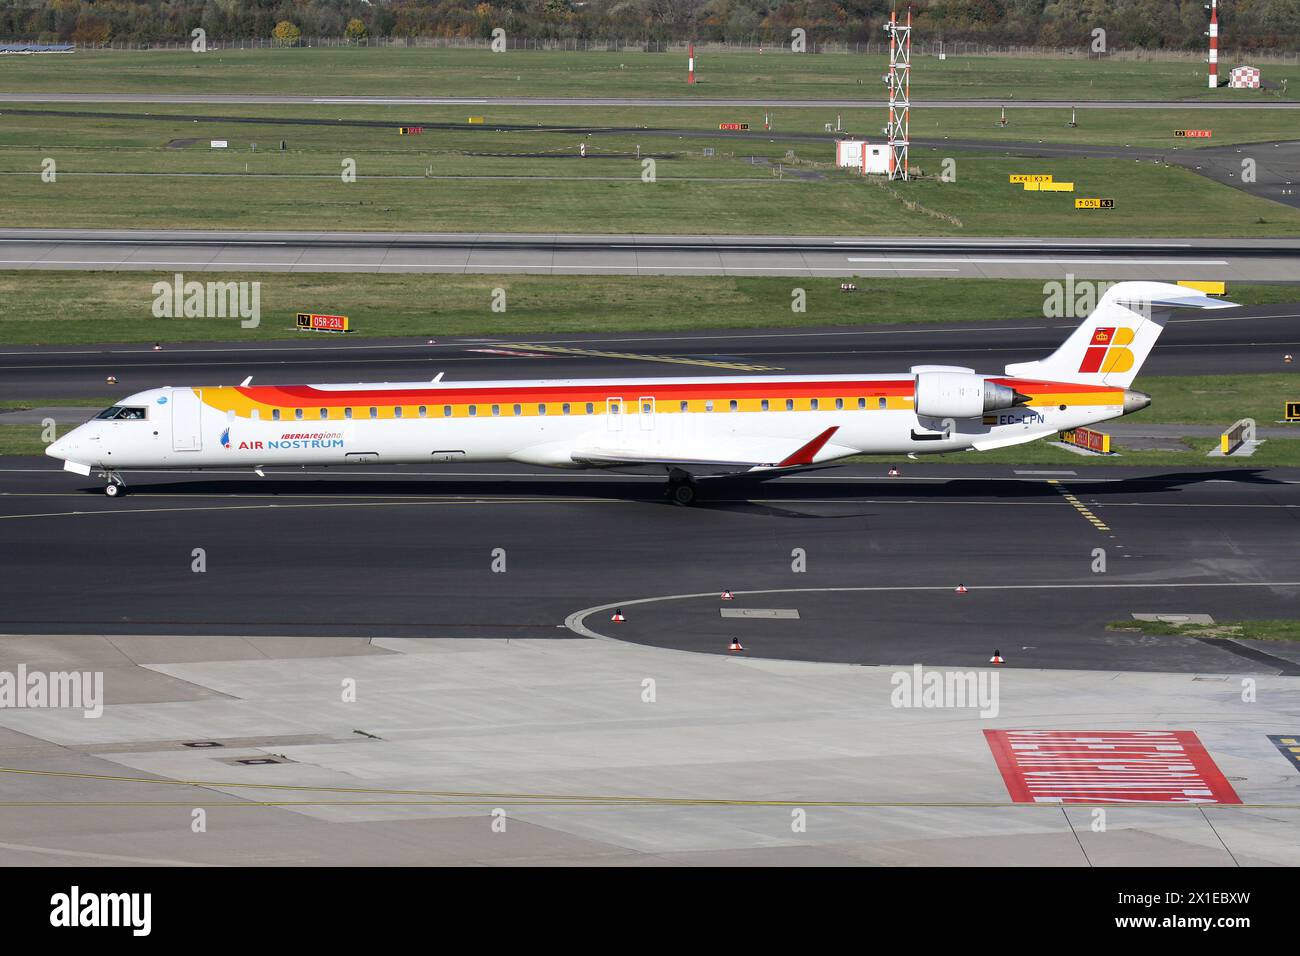 Spanish Air Nostrum Bombardier CRJ1000 with registration EC-LPN in Iberia Regional livery on taxiway at Dusseldorf Airport Stock Photo